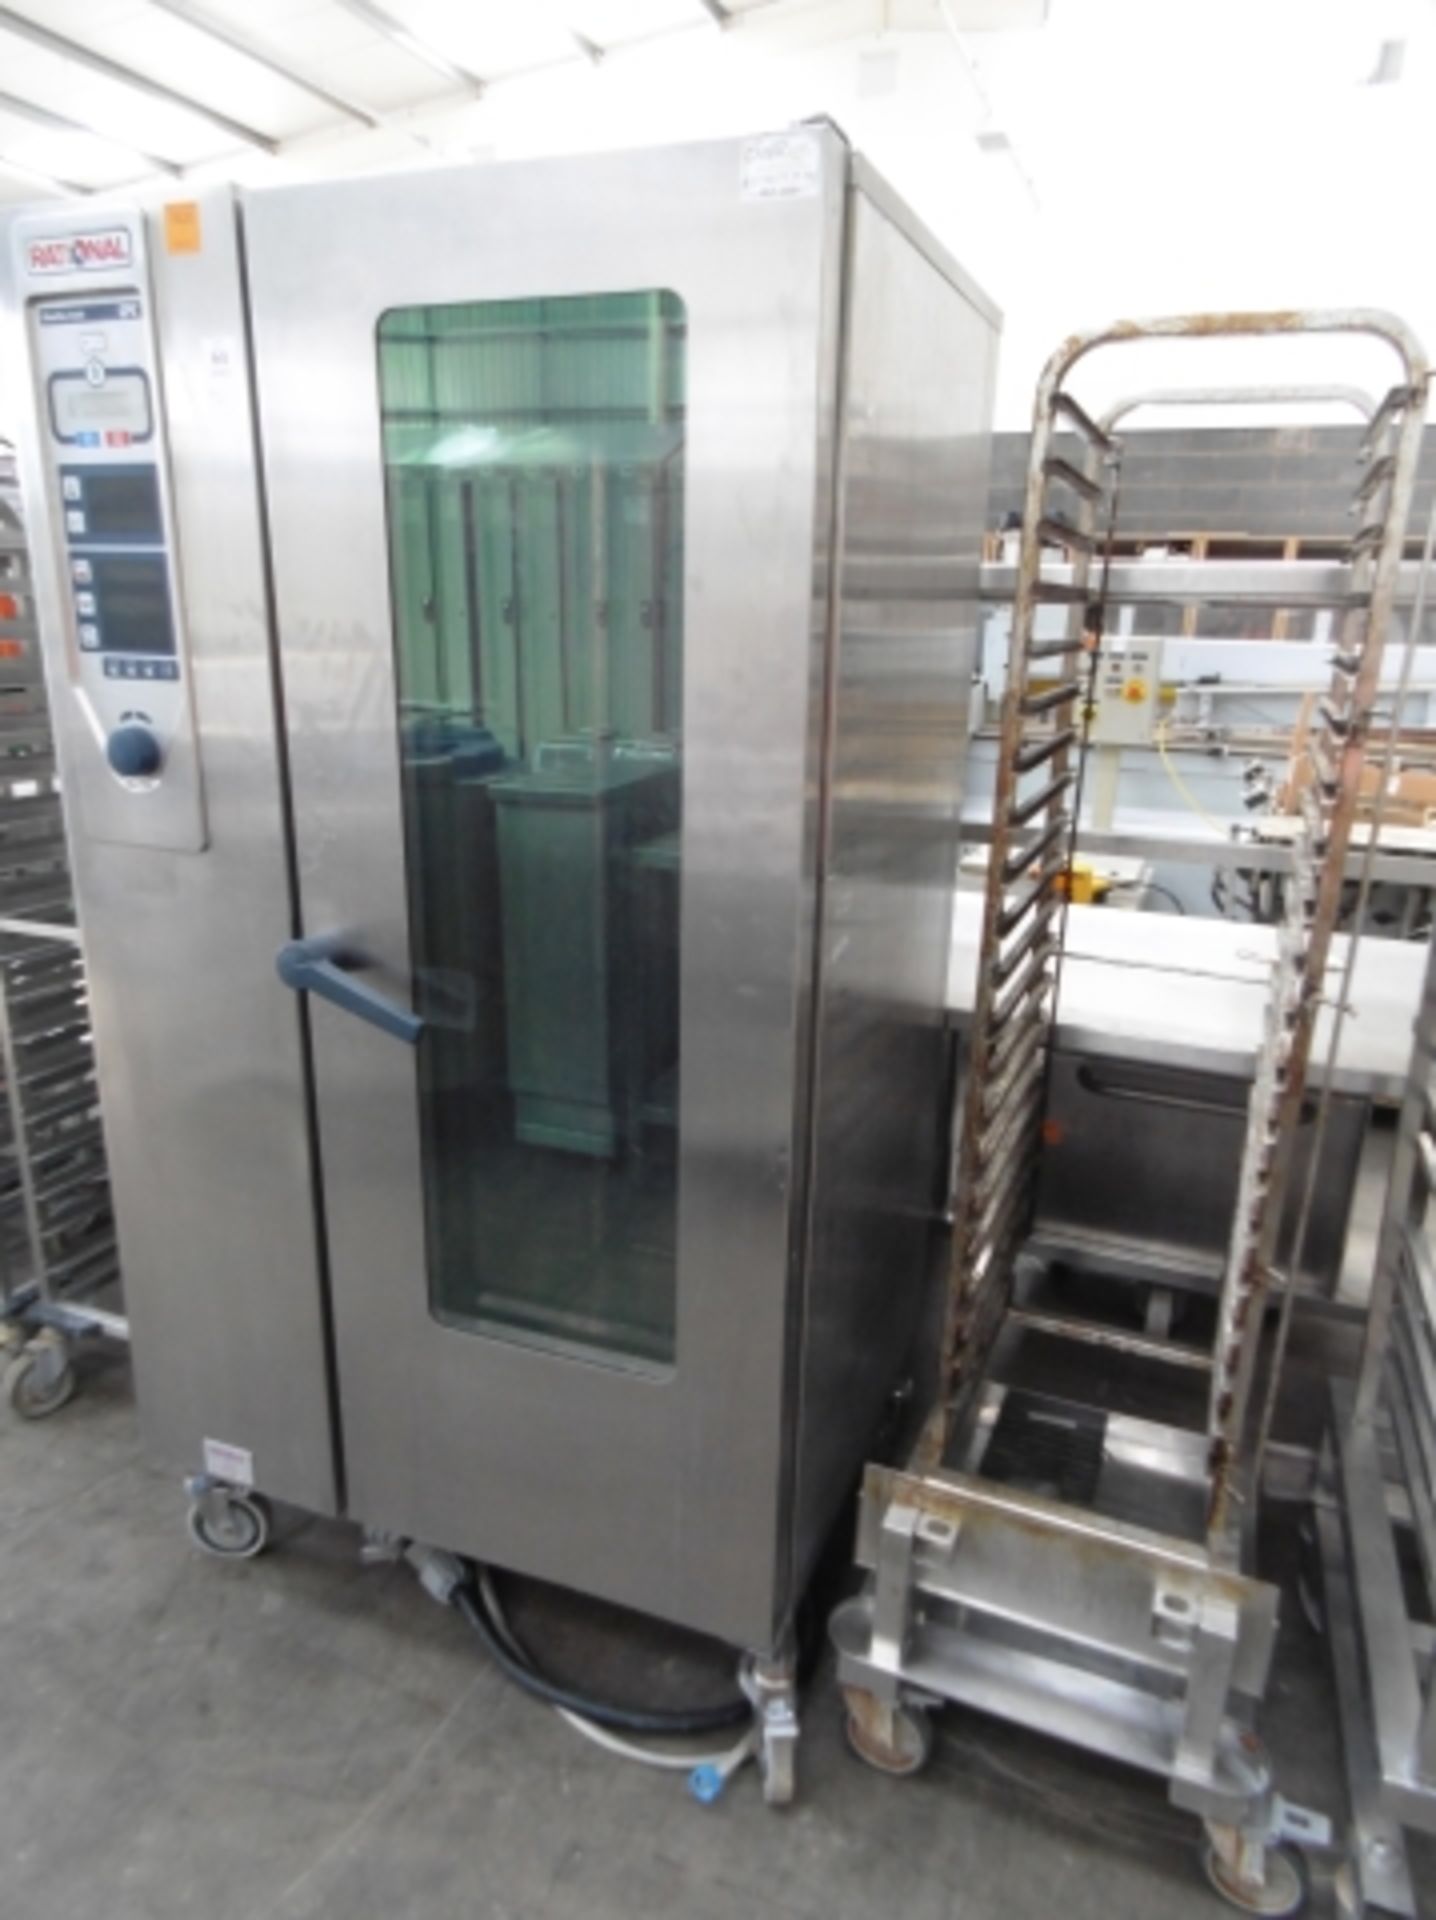 * Rational Clima Combi Plus CPC Combi Oven; 3 Phase - 400V; c/w stainless steel rack trolley. Please - Image 2 of 6